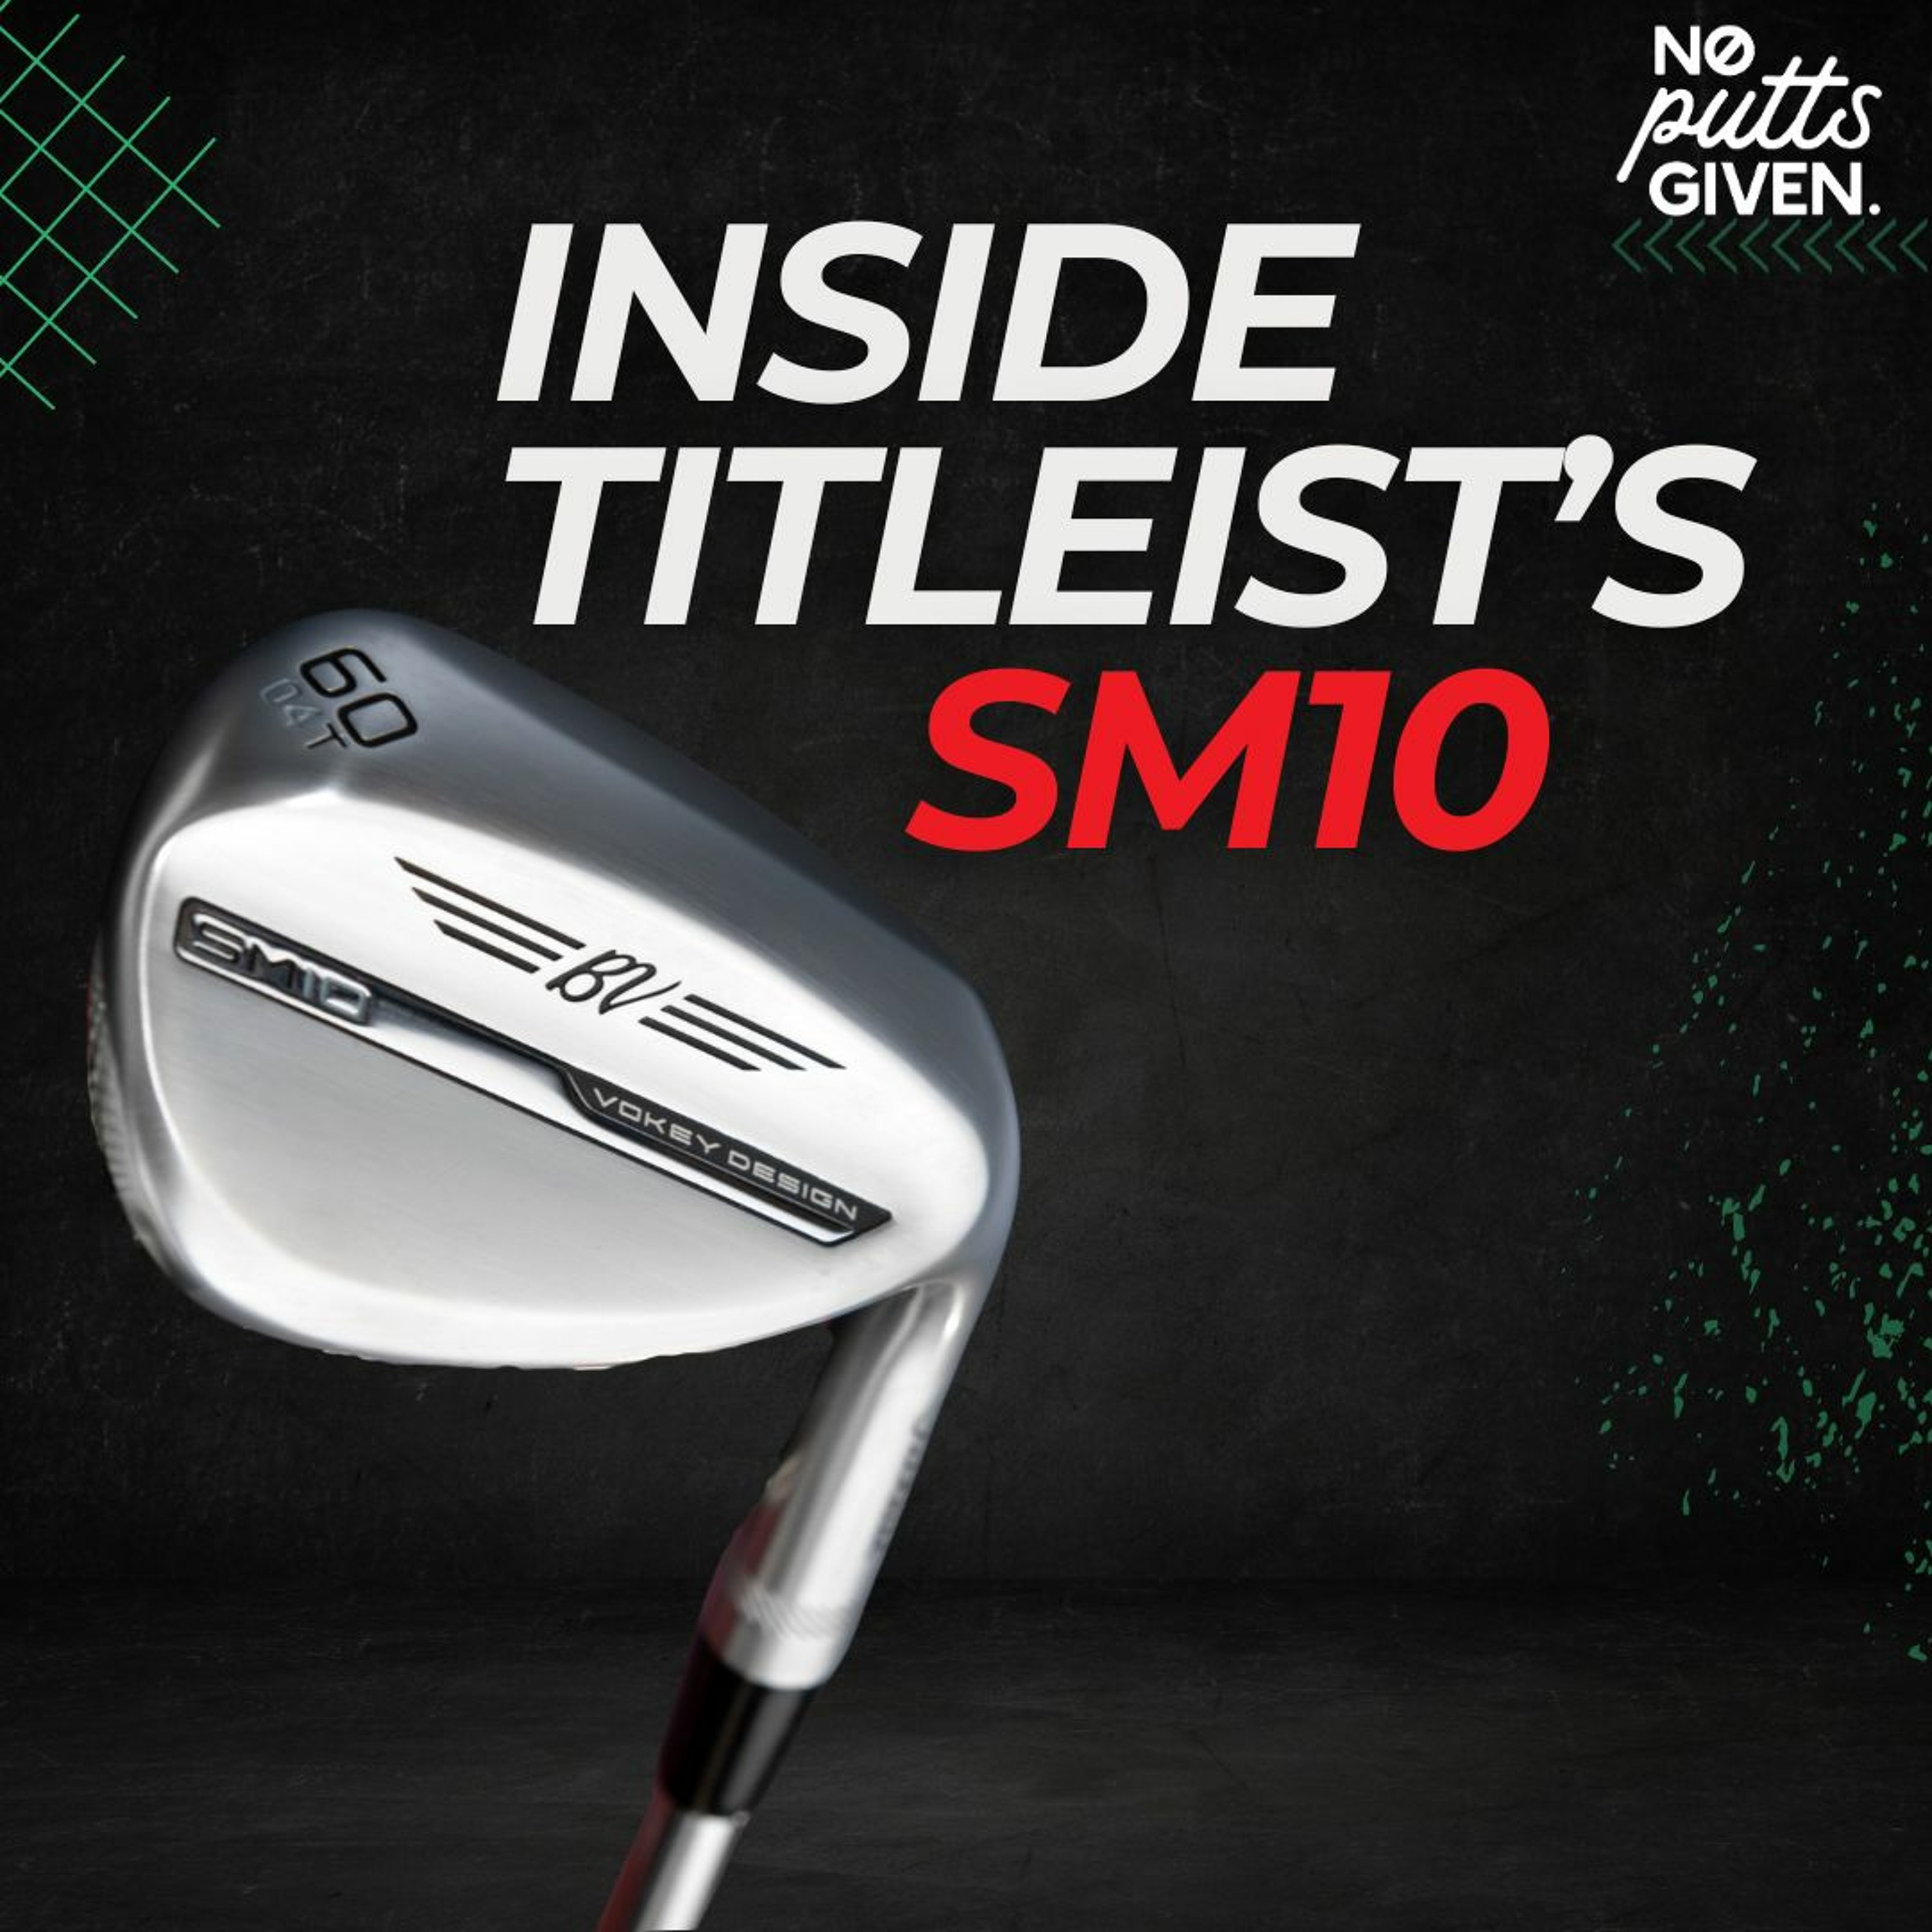 The Truth About Vokey’s New SM10 Wedges | No Putts Given